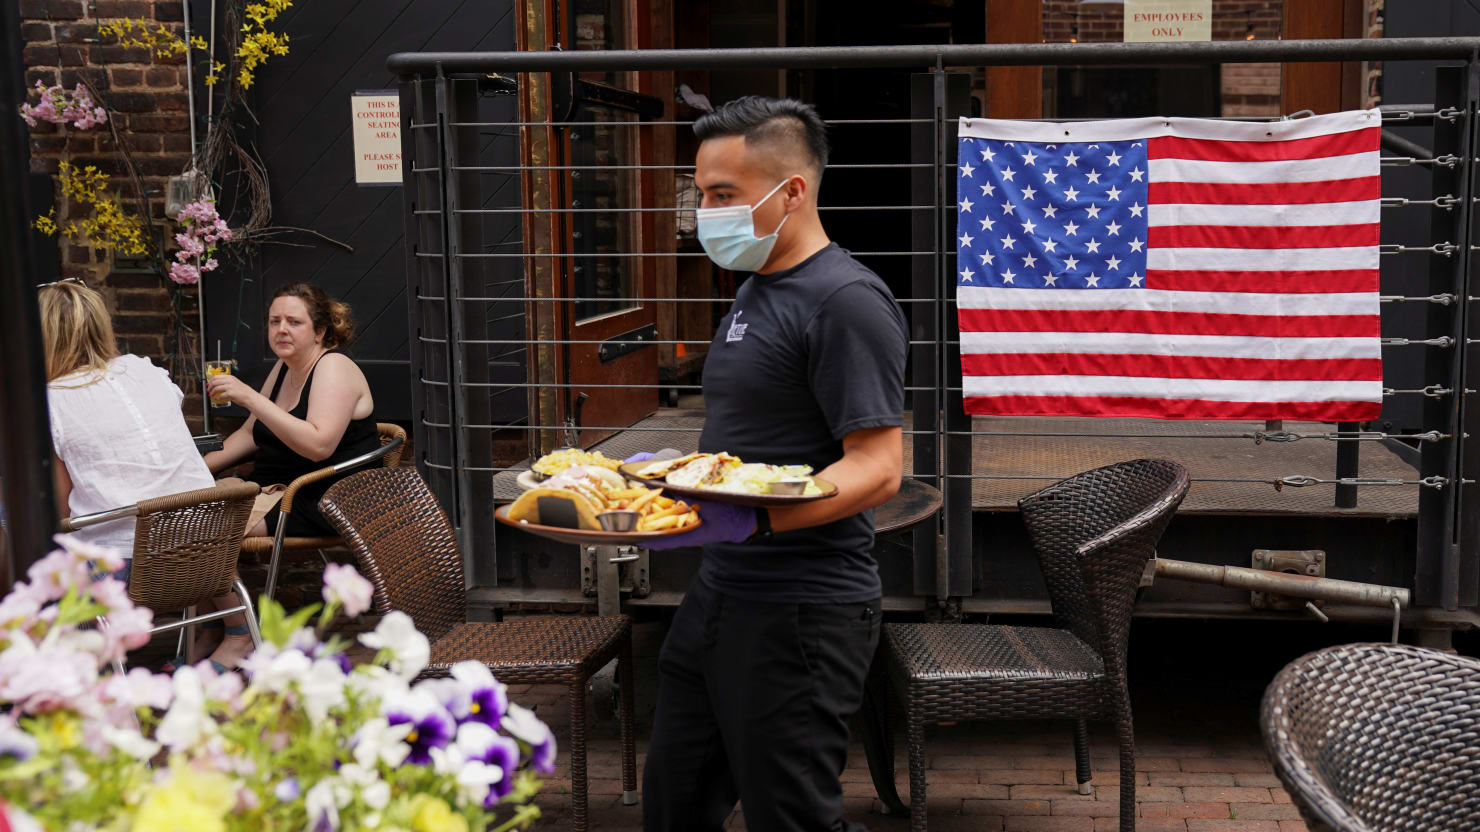 Waiters Tips Can Be Pulled by Restaurant Owners in Last Minute Trump